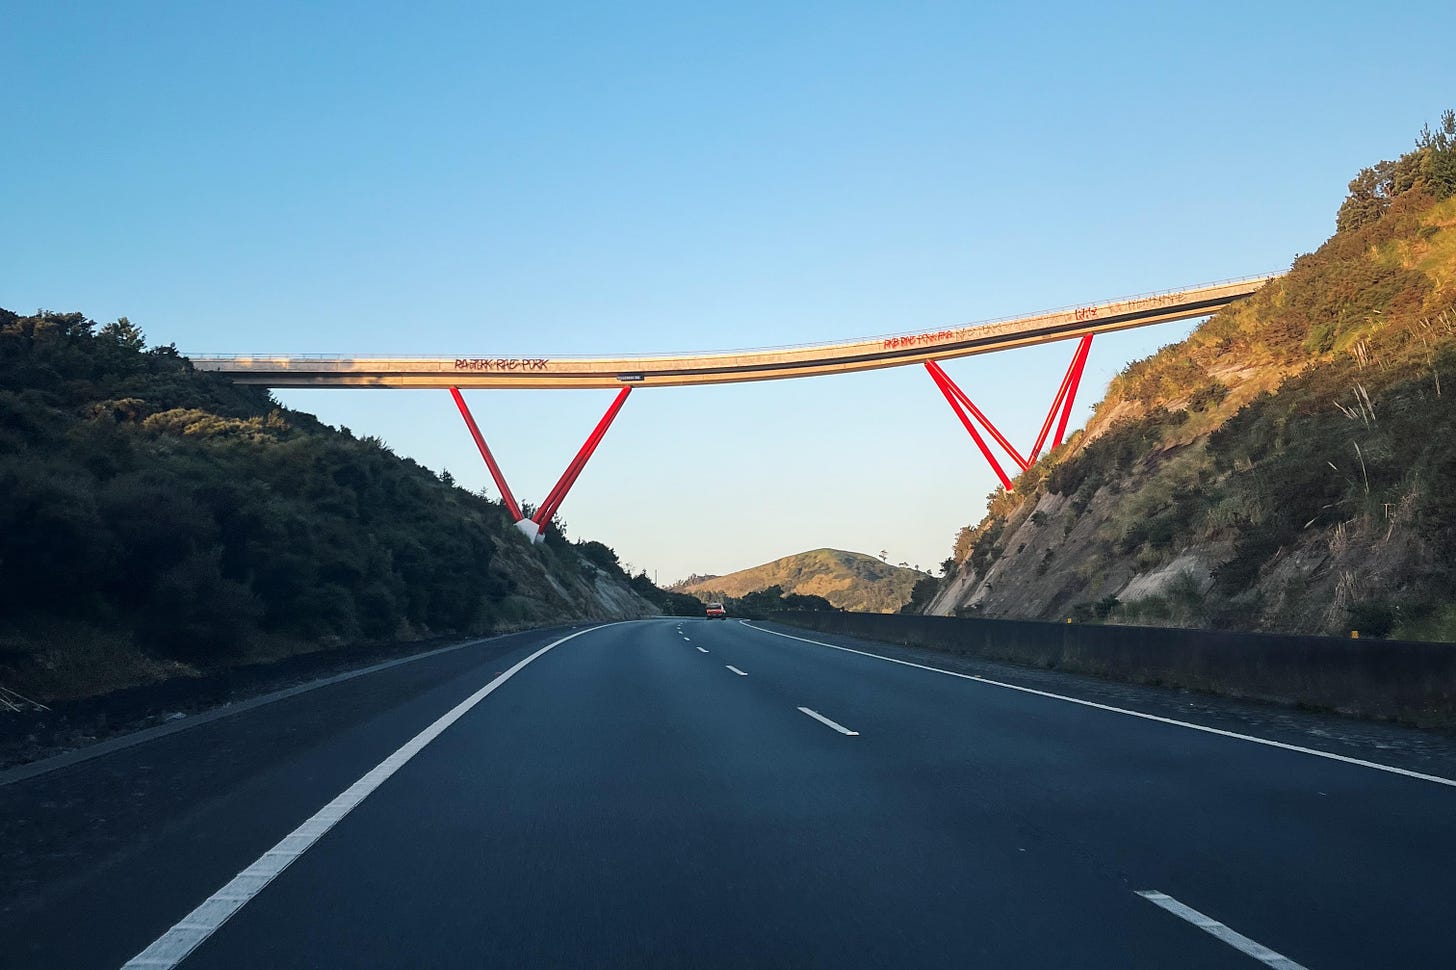 a late evening scene on a motorway, golden light hitting an unusual bridge with angled red struts, flanked by scrubby hills